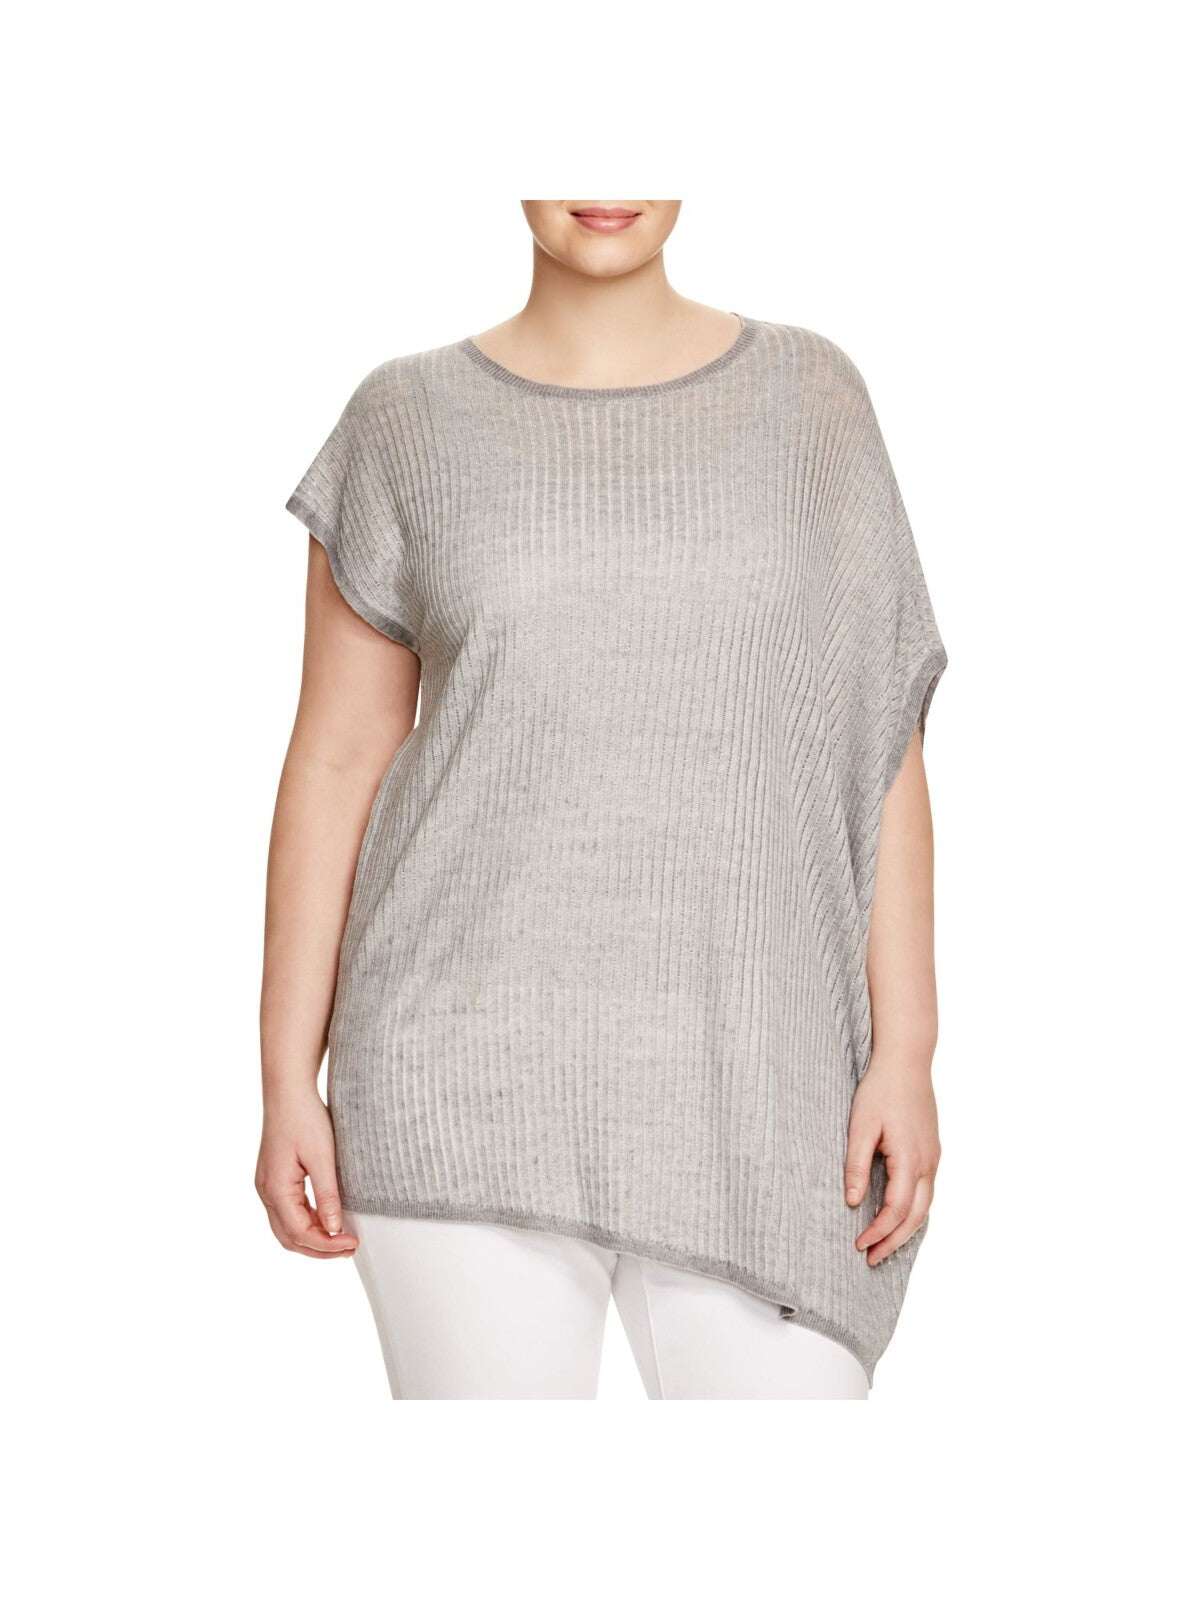 EILEEN FISHER Womens Gray Ribbed Asymmetric Short Sleeve Round Neck Tunic Sweater Plus 2X